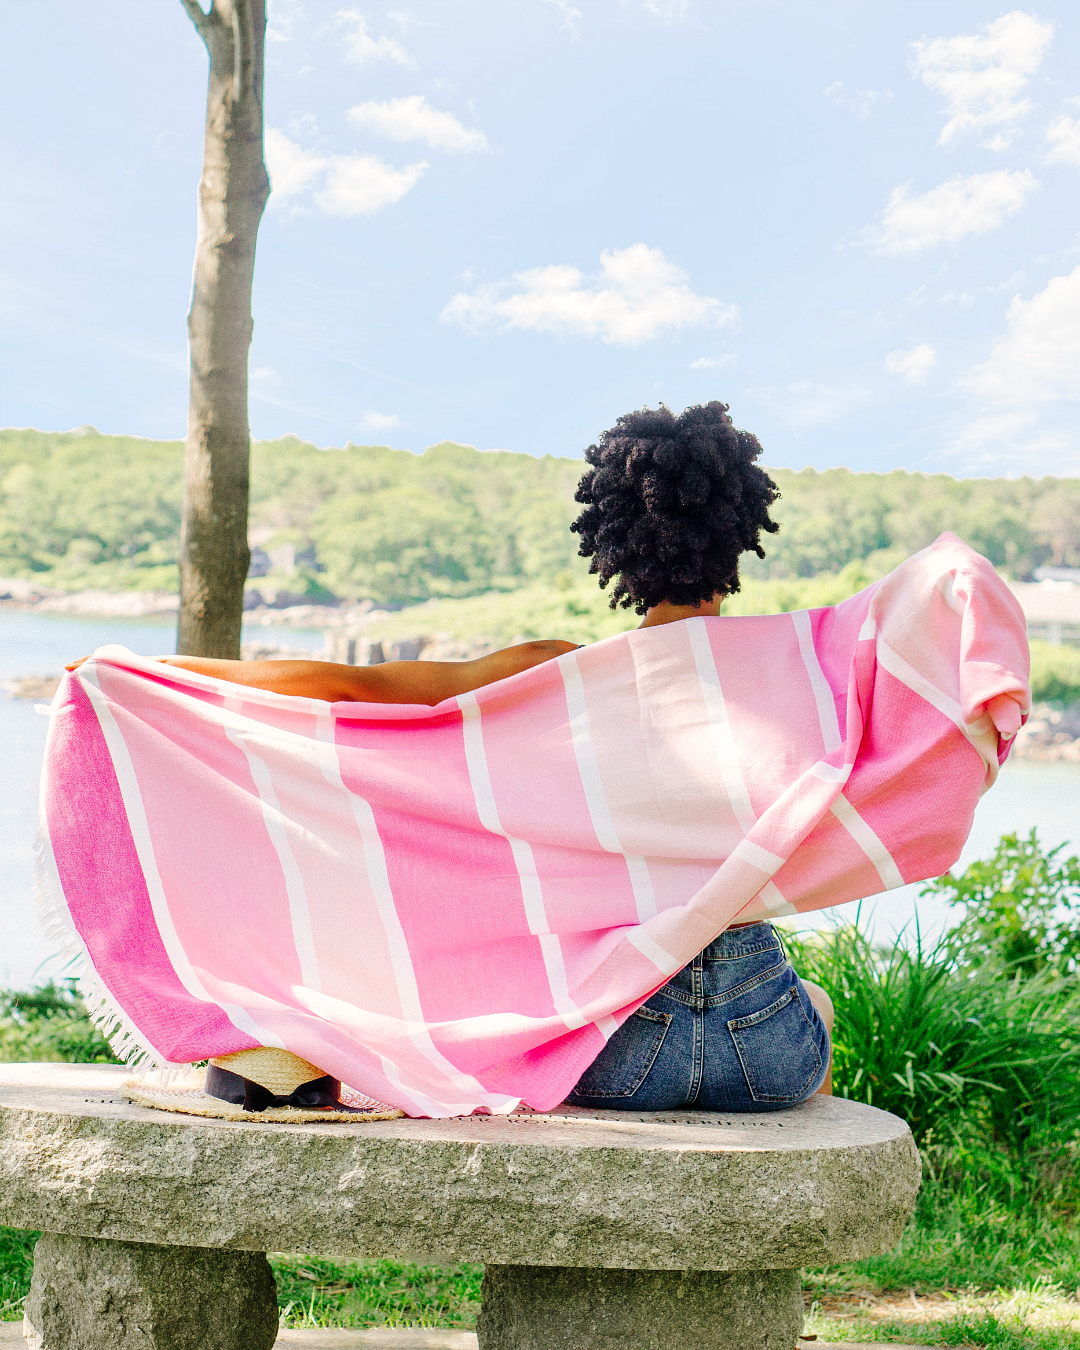 Brand and Product Photography by Alexis The Greek | Turkish Towels by janegee | Minorities and POC | Women of Color